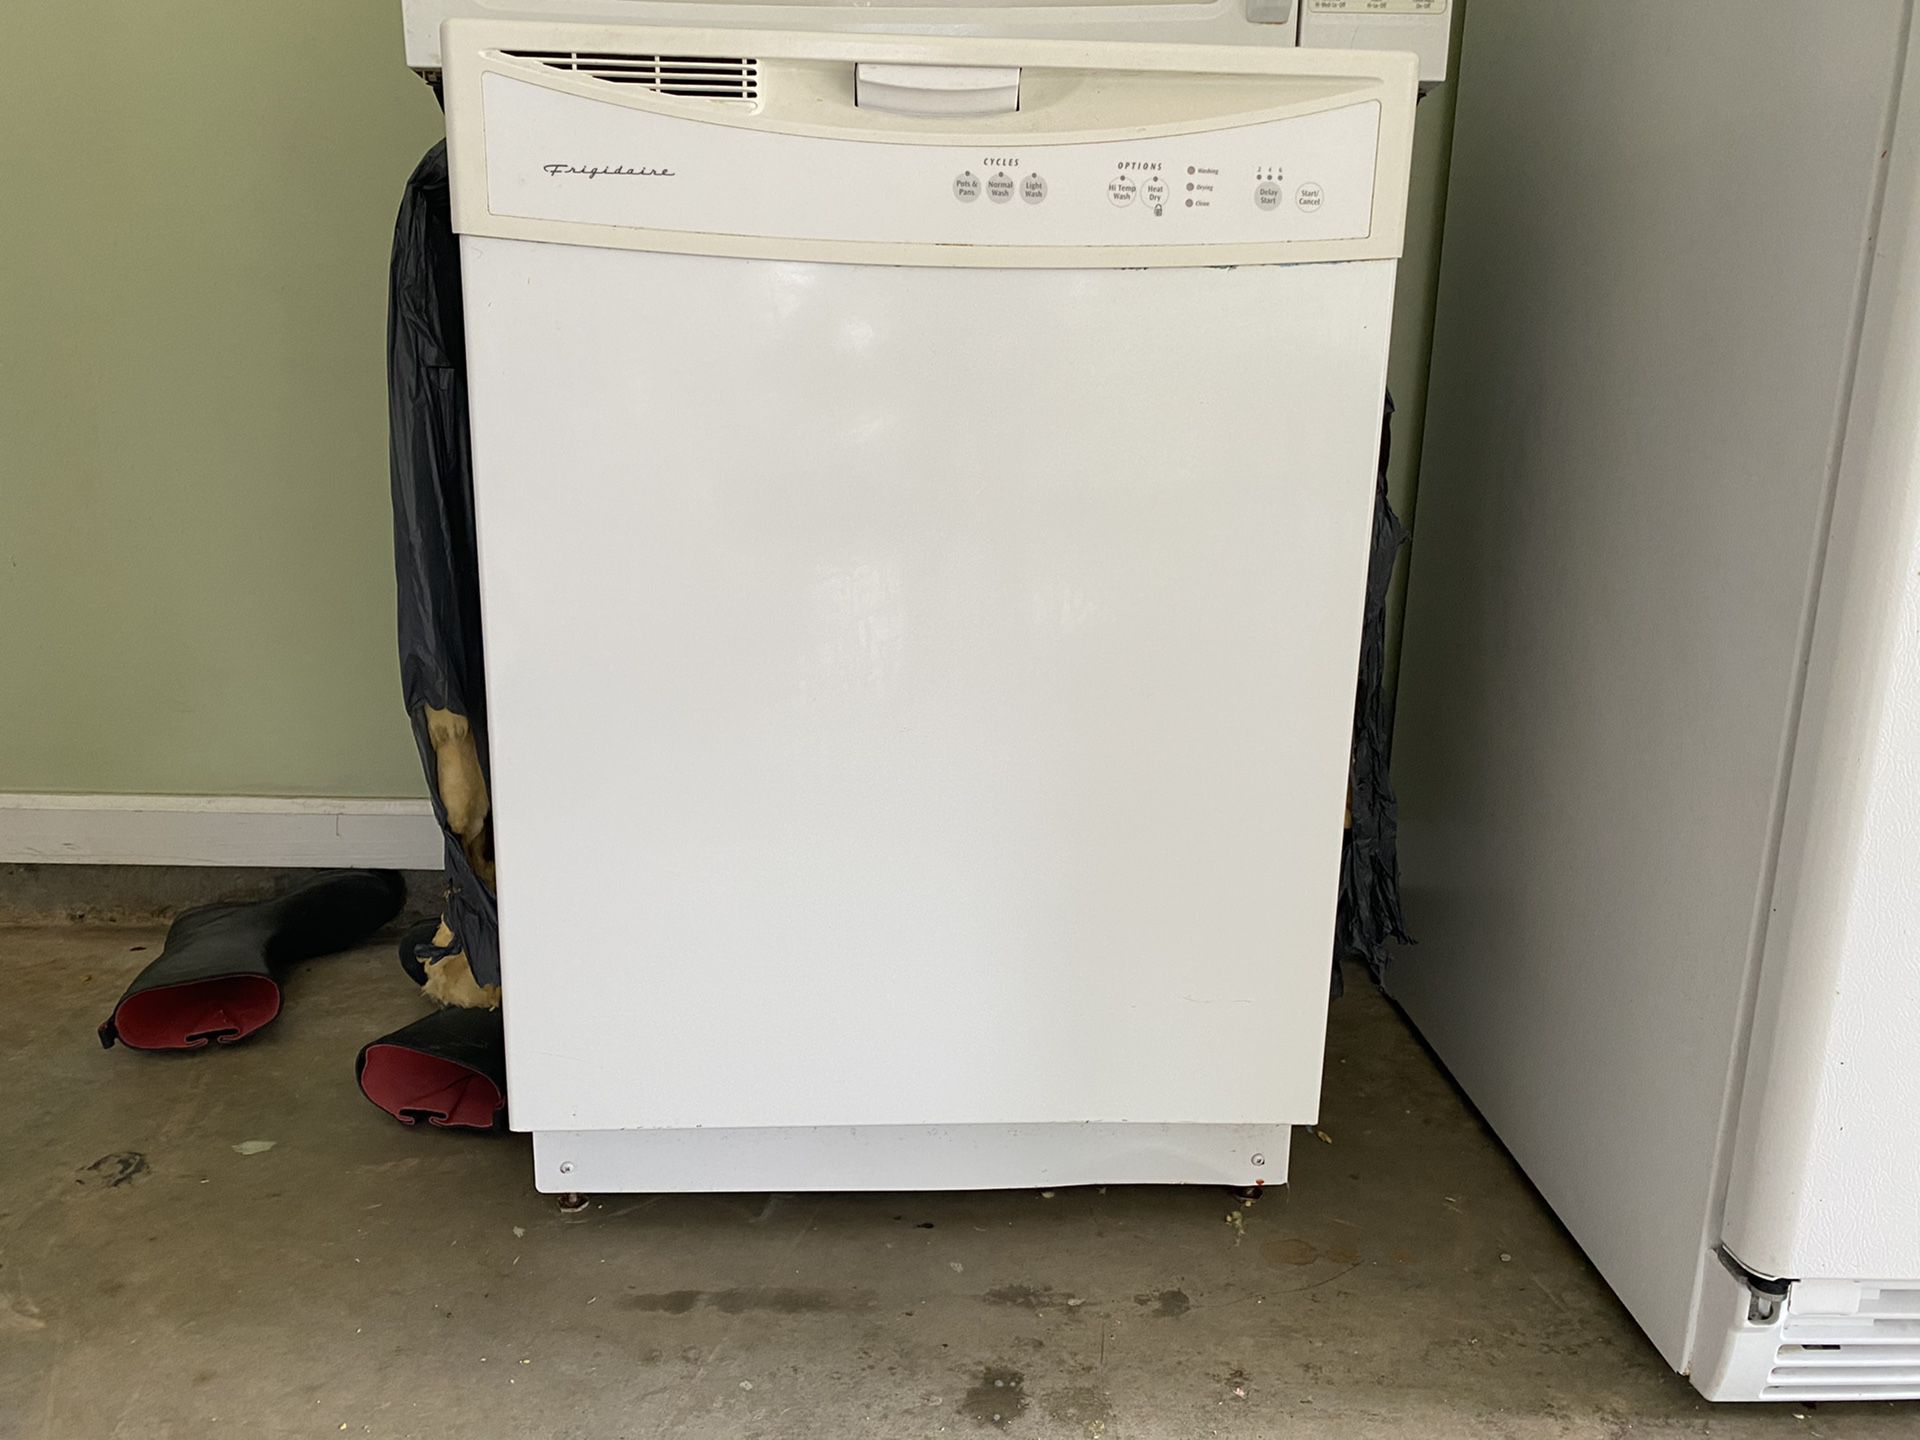 All four for $400. In good condition. All Whirlpool except dishwasher is Frigidaire.